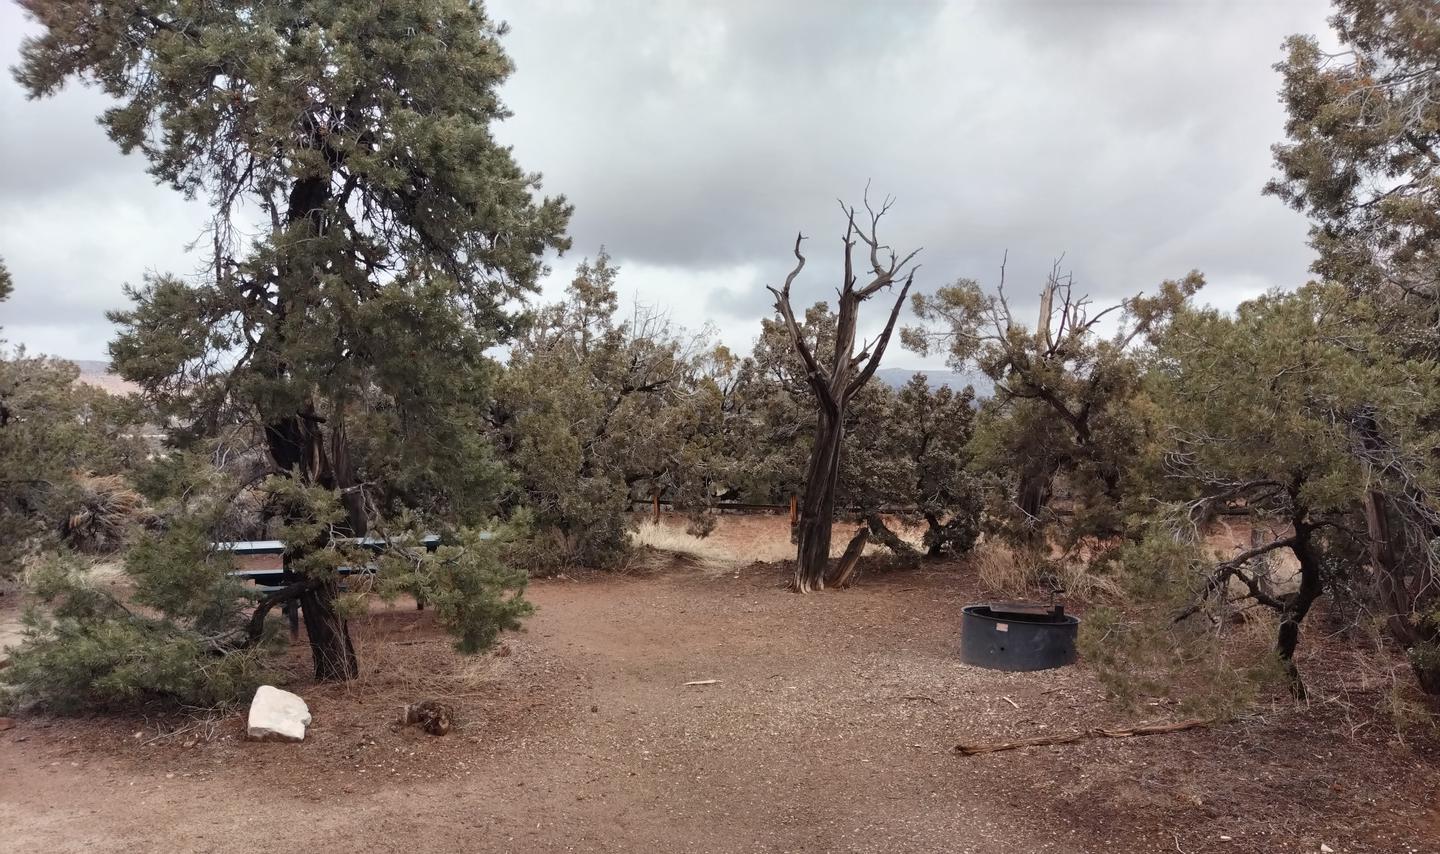 The picnic table and metal fire ring at site one, surrounded by trees.Site 1 has one tent pad, a picnic table, and a metal fire ring. The Natural Bridges Campground is surrounded by a pinon-juniper forest.